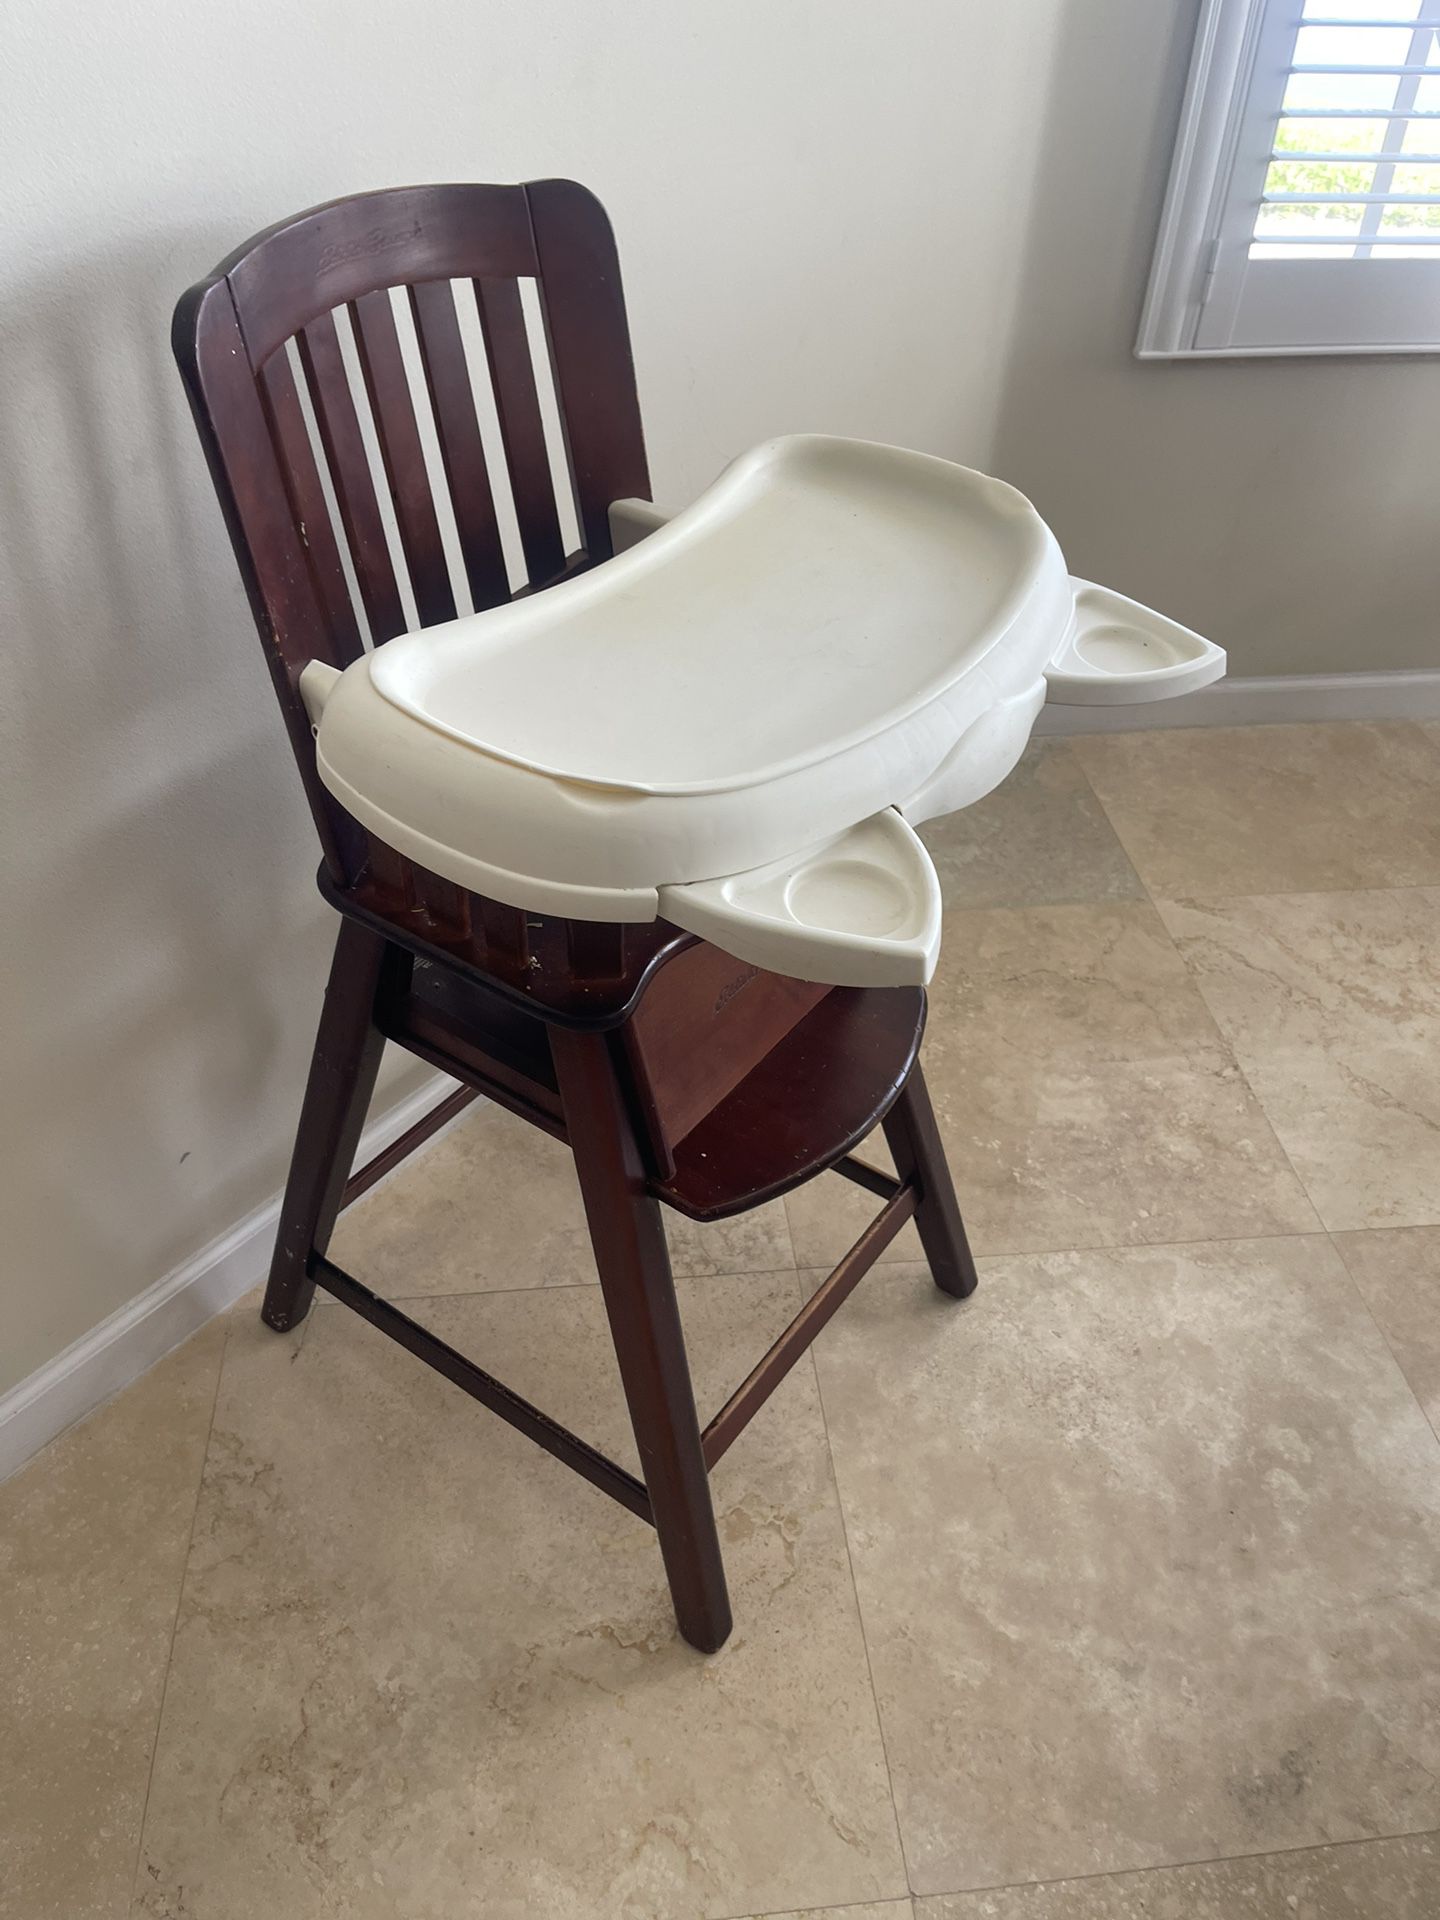 Wooden High Chair - LIKE NEW 